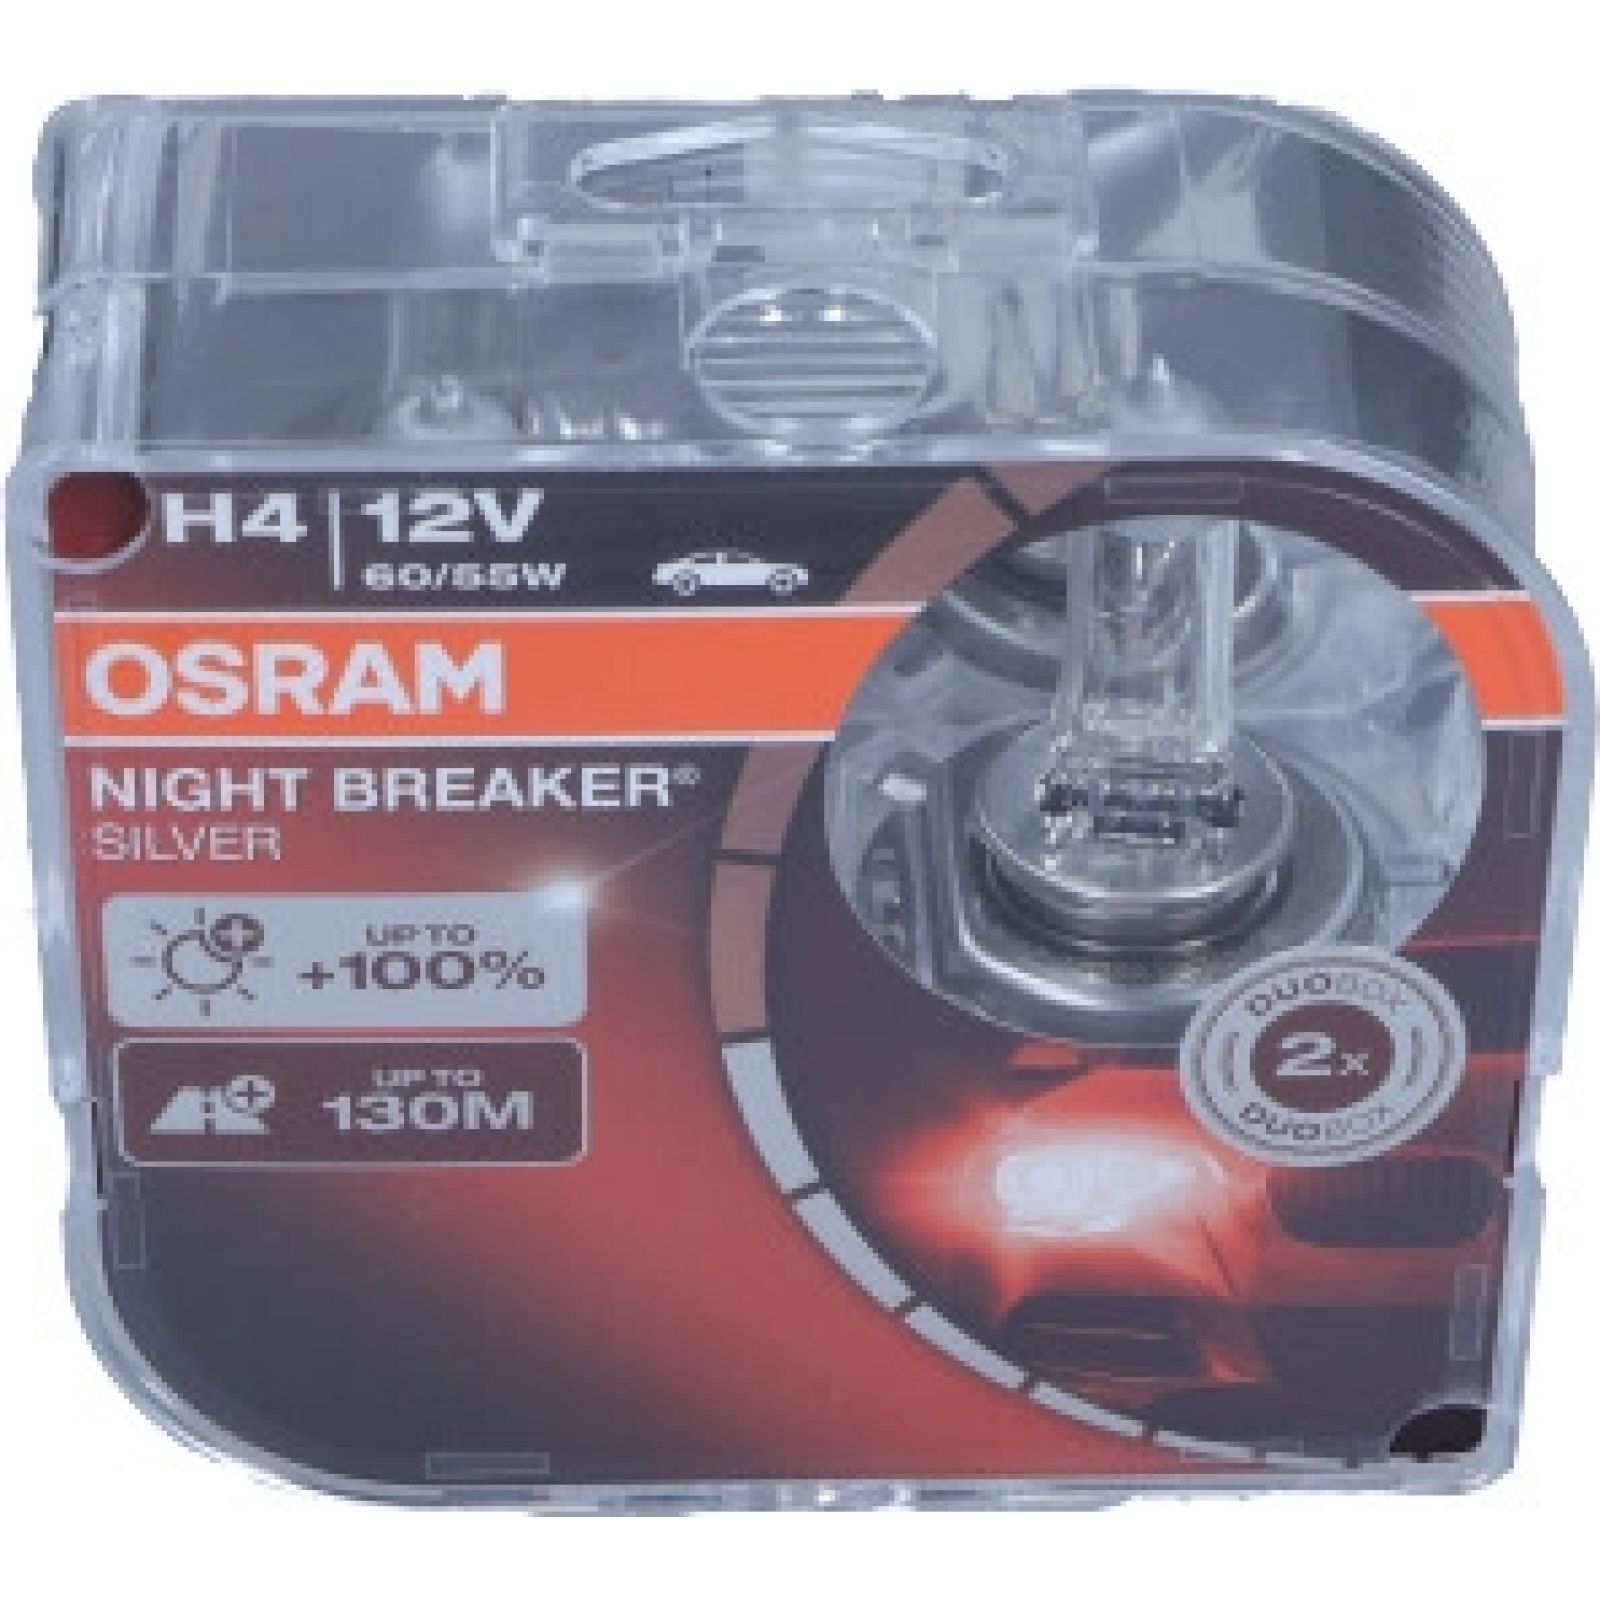 https://www.autoteile-store.at/img/product/h4-osram-12v-6055w-p43t-nbs-night-breaker-silver-night-breaker-r-silver-64193nbs-hcb-200189/2ae32045f578dd597c3ee0d674ad4e6c_1600.jpg